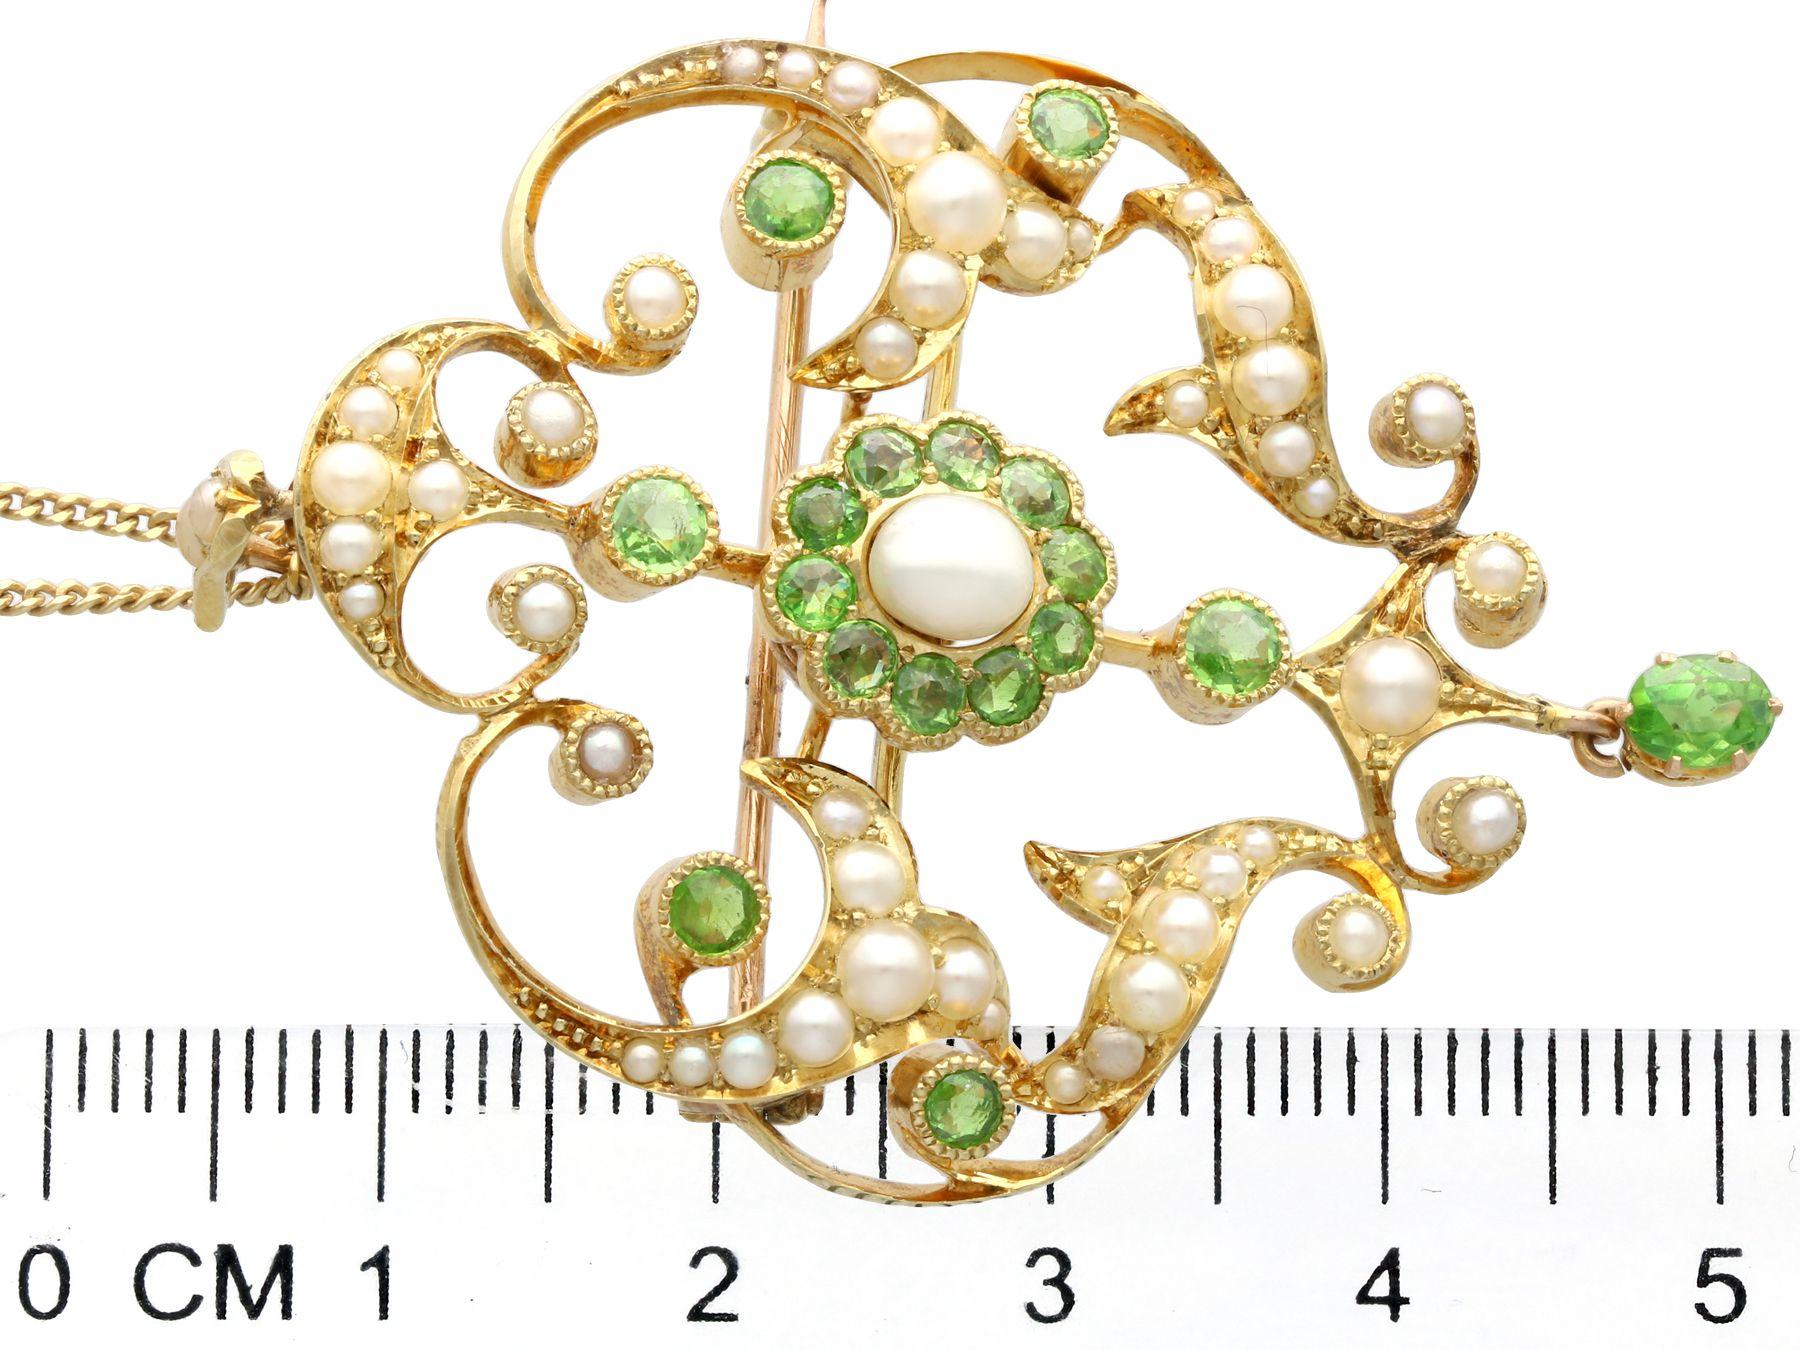 Antique 1.19 Carat Demantoid Garnet and Seed Pearl Yellow Gold Pendant Brooch For Sale 1